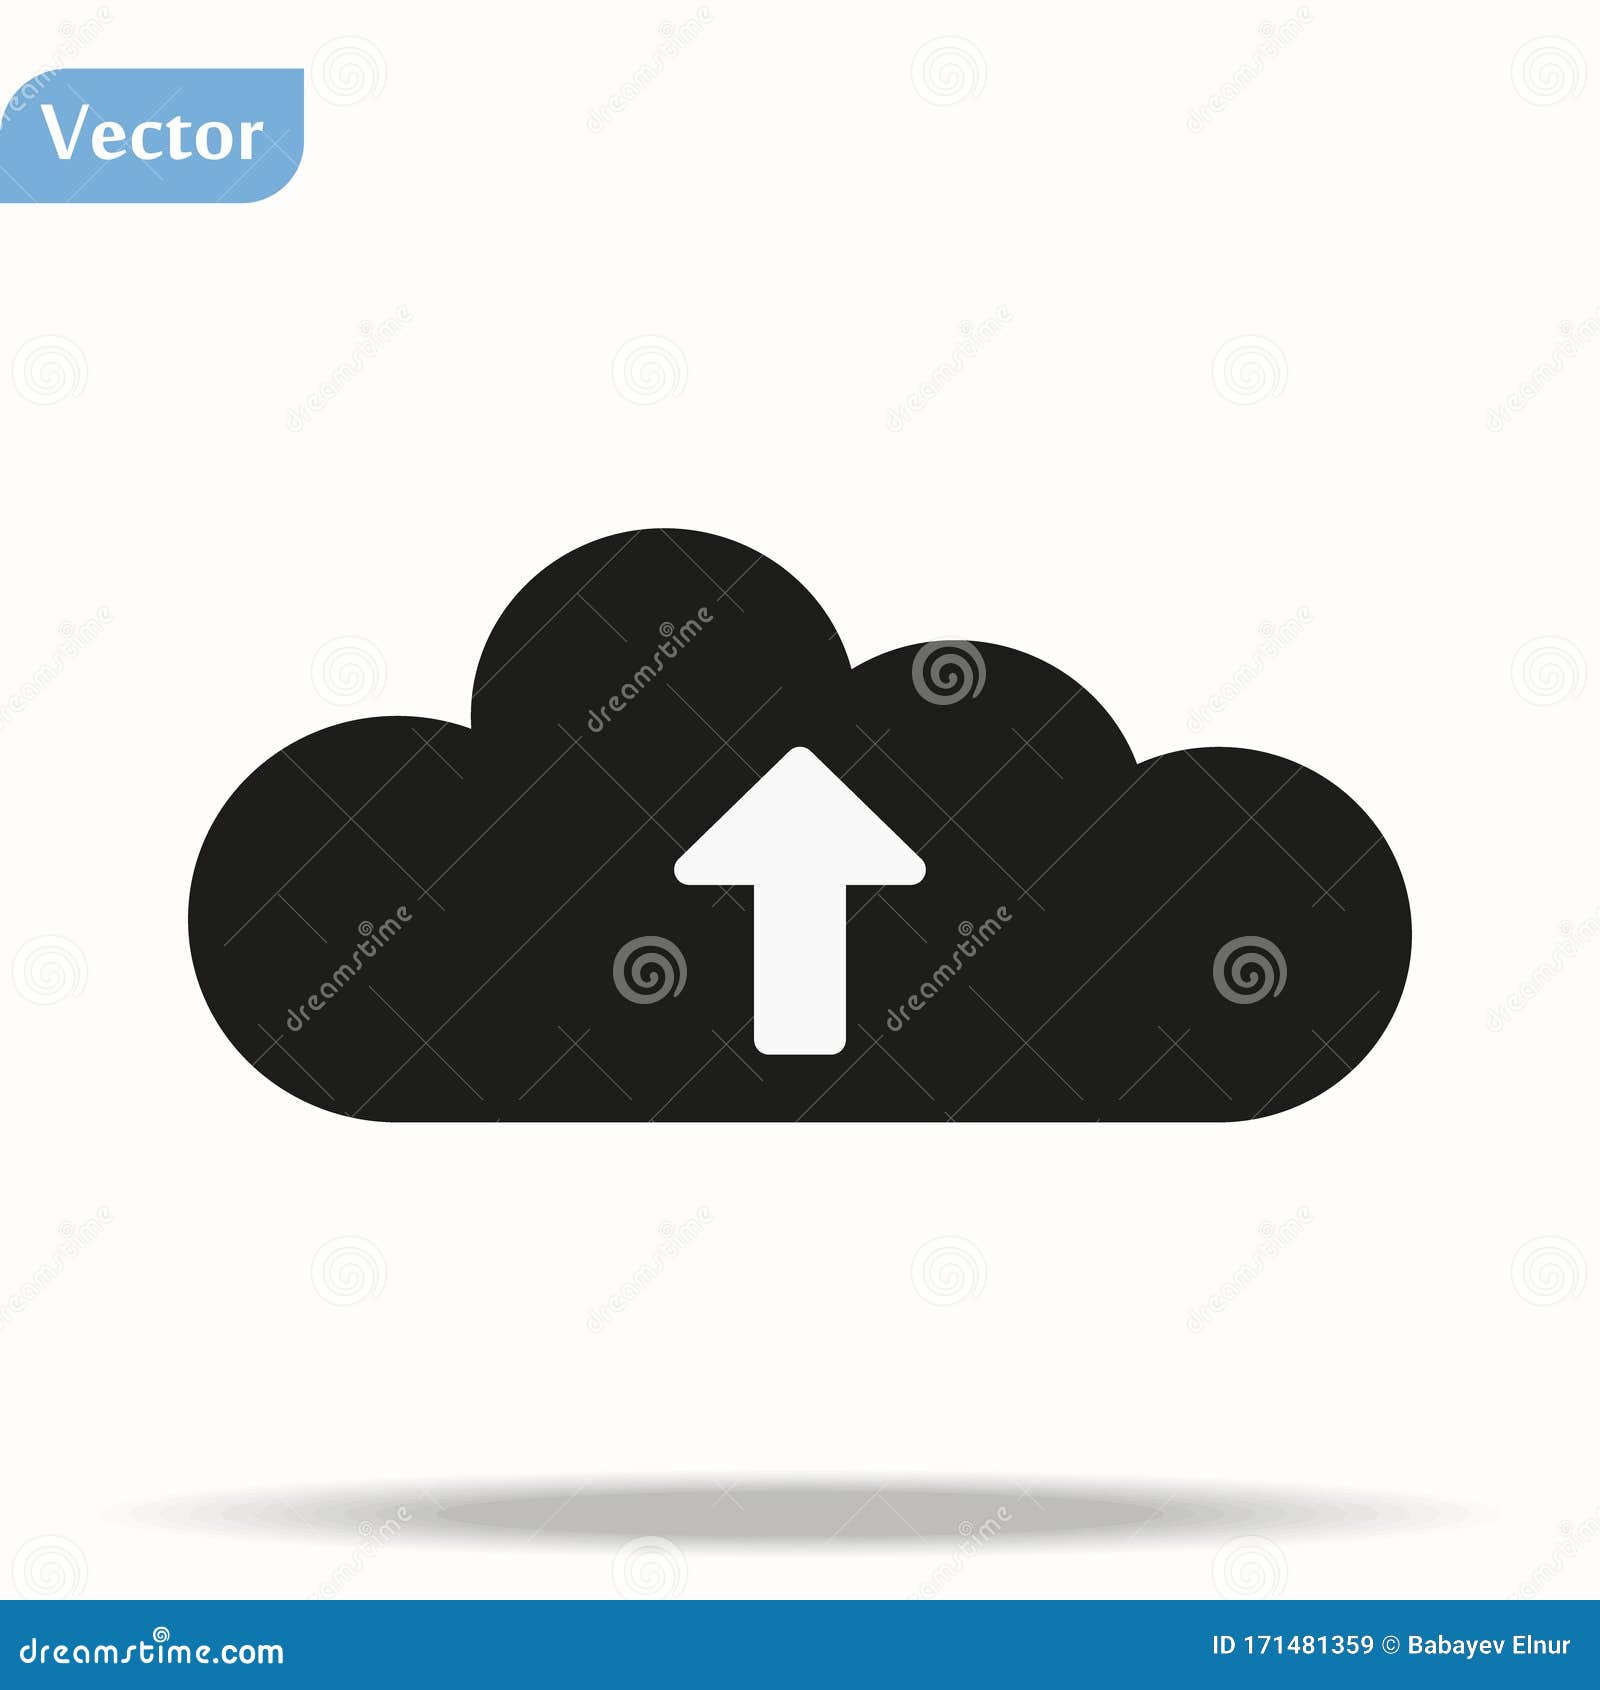 icon for dowload and upload activities. flat style for graphic and web , logo. eps10 black pictogram